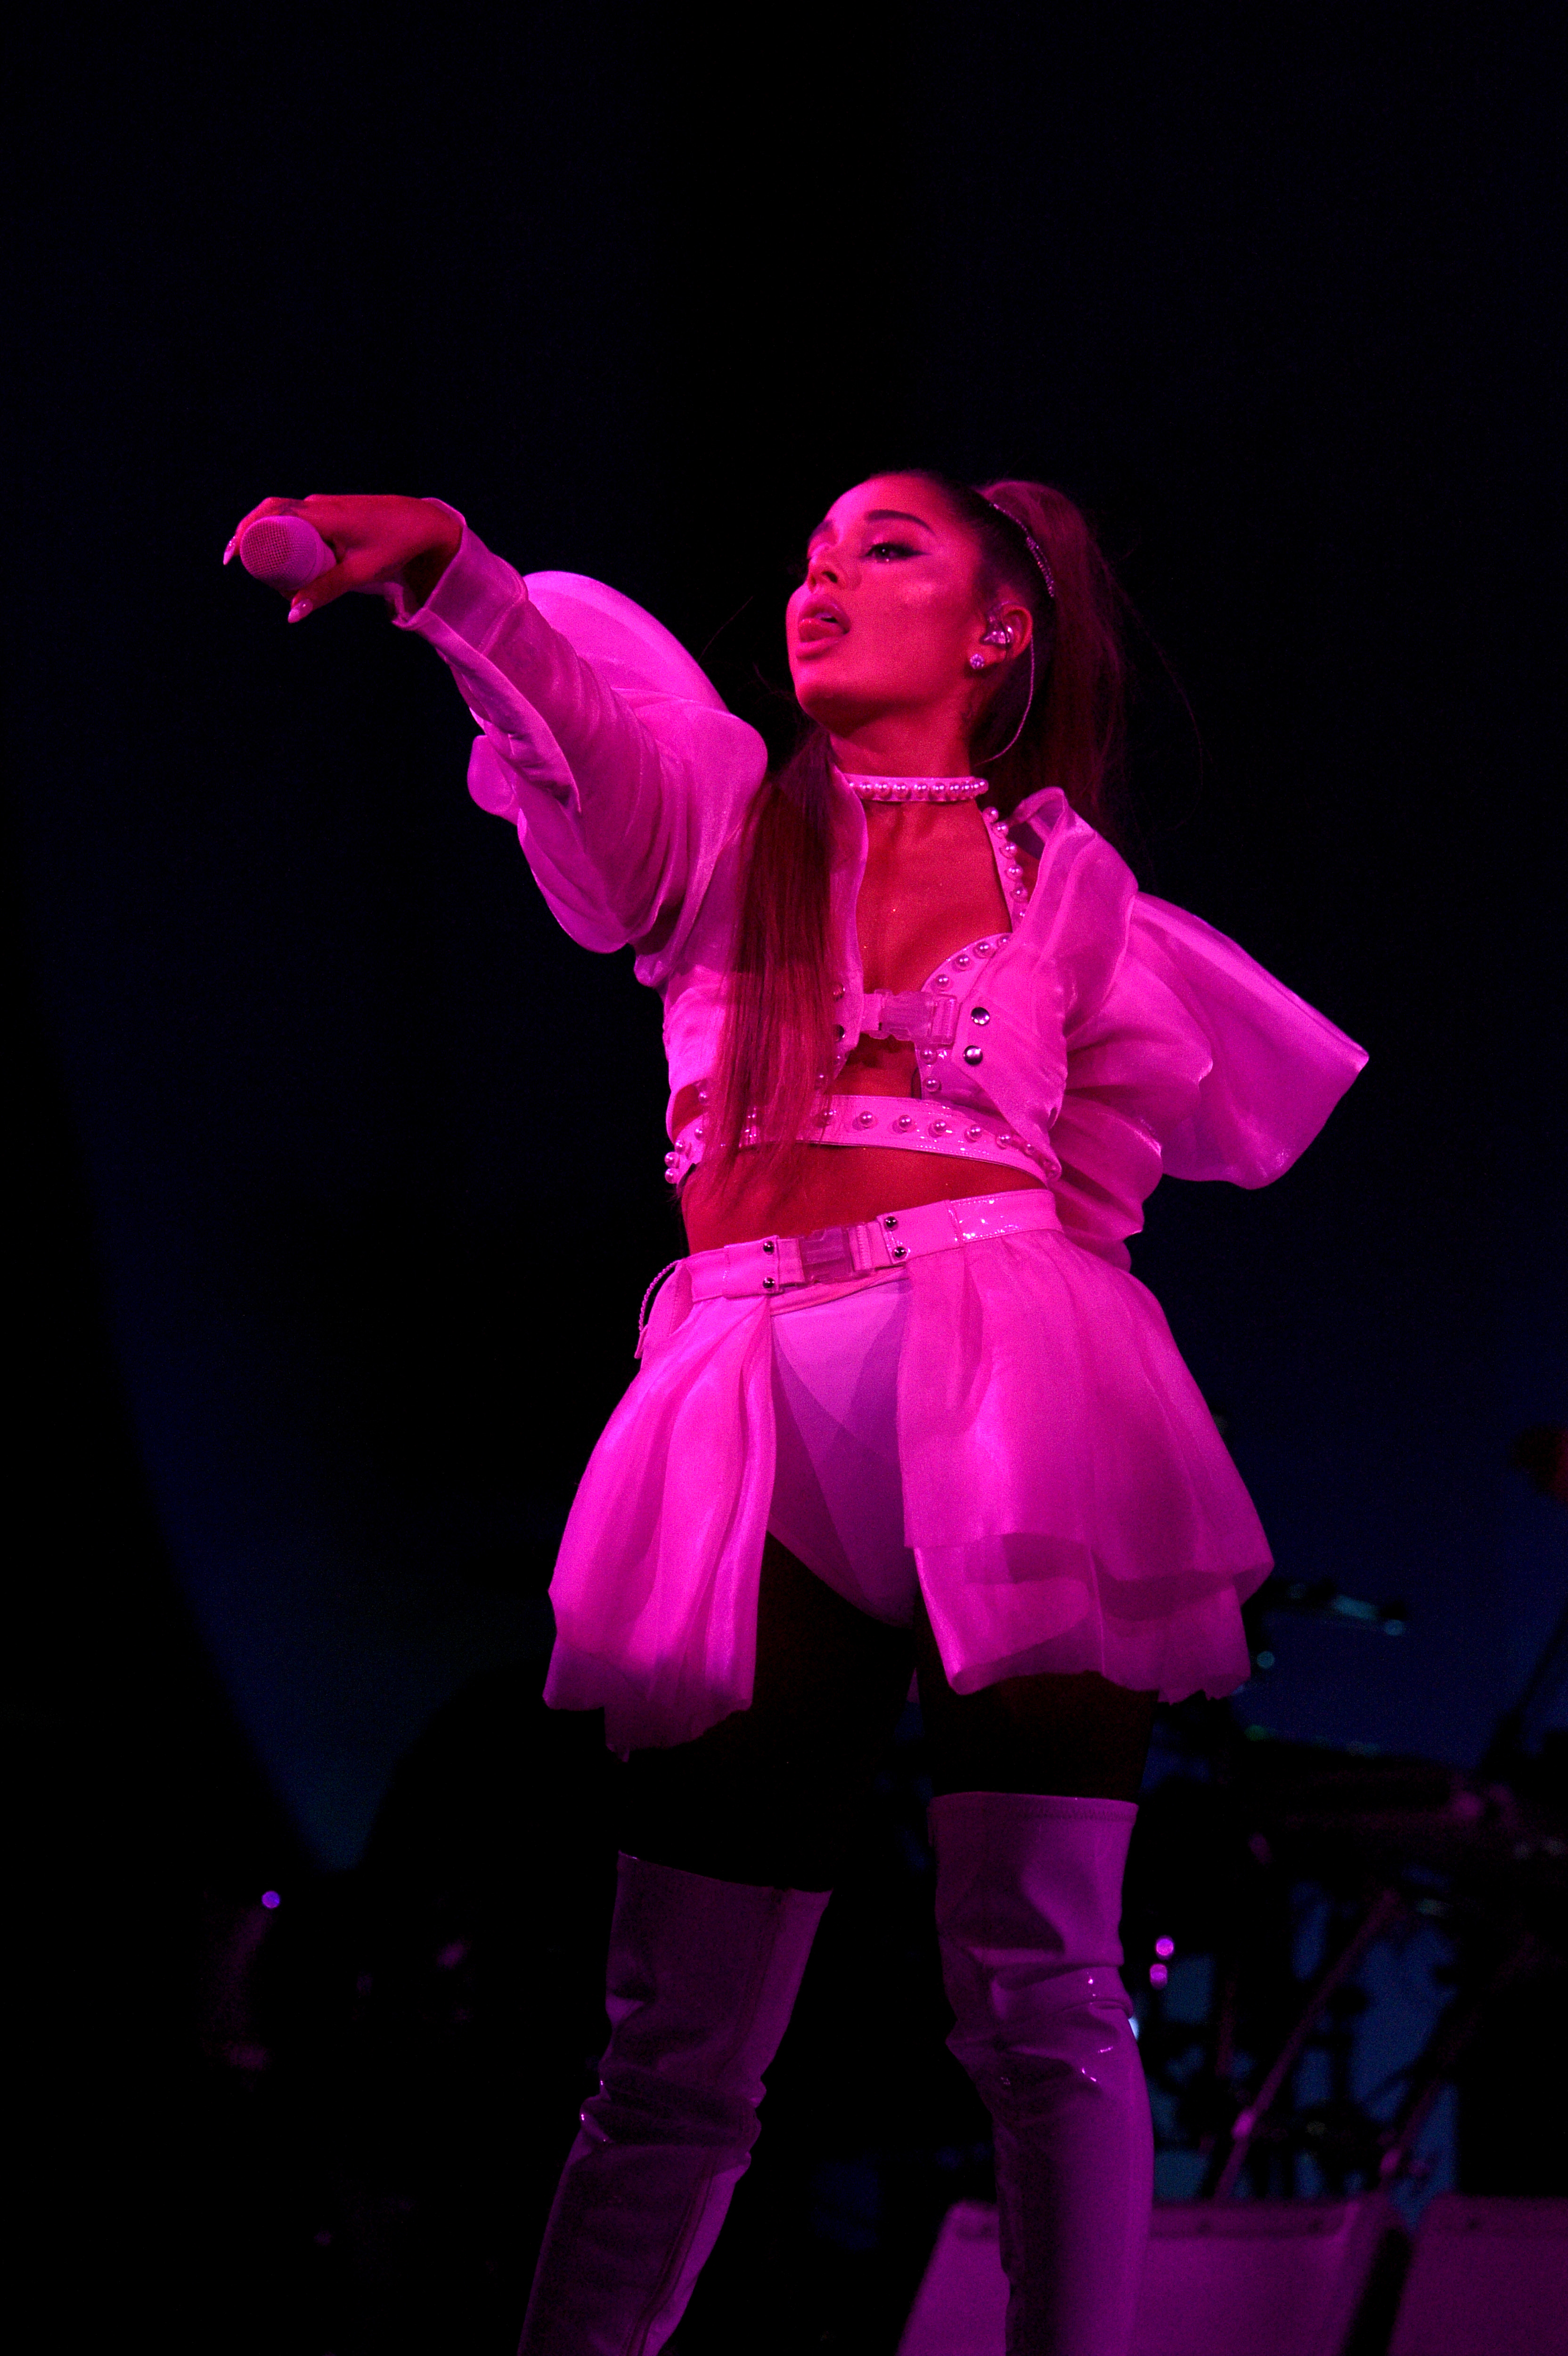 Ariana Grande performing on stage, wearing a stylish white outfit with knee-high boots